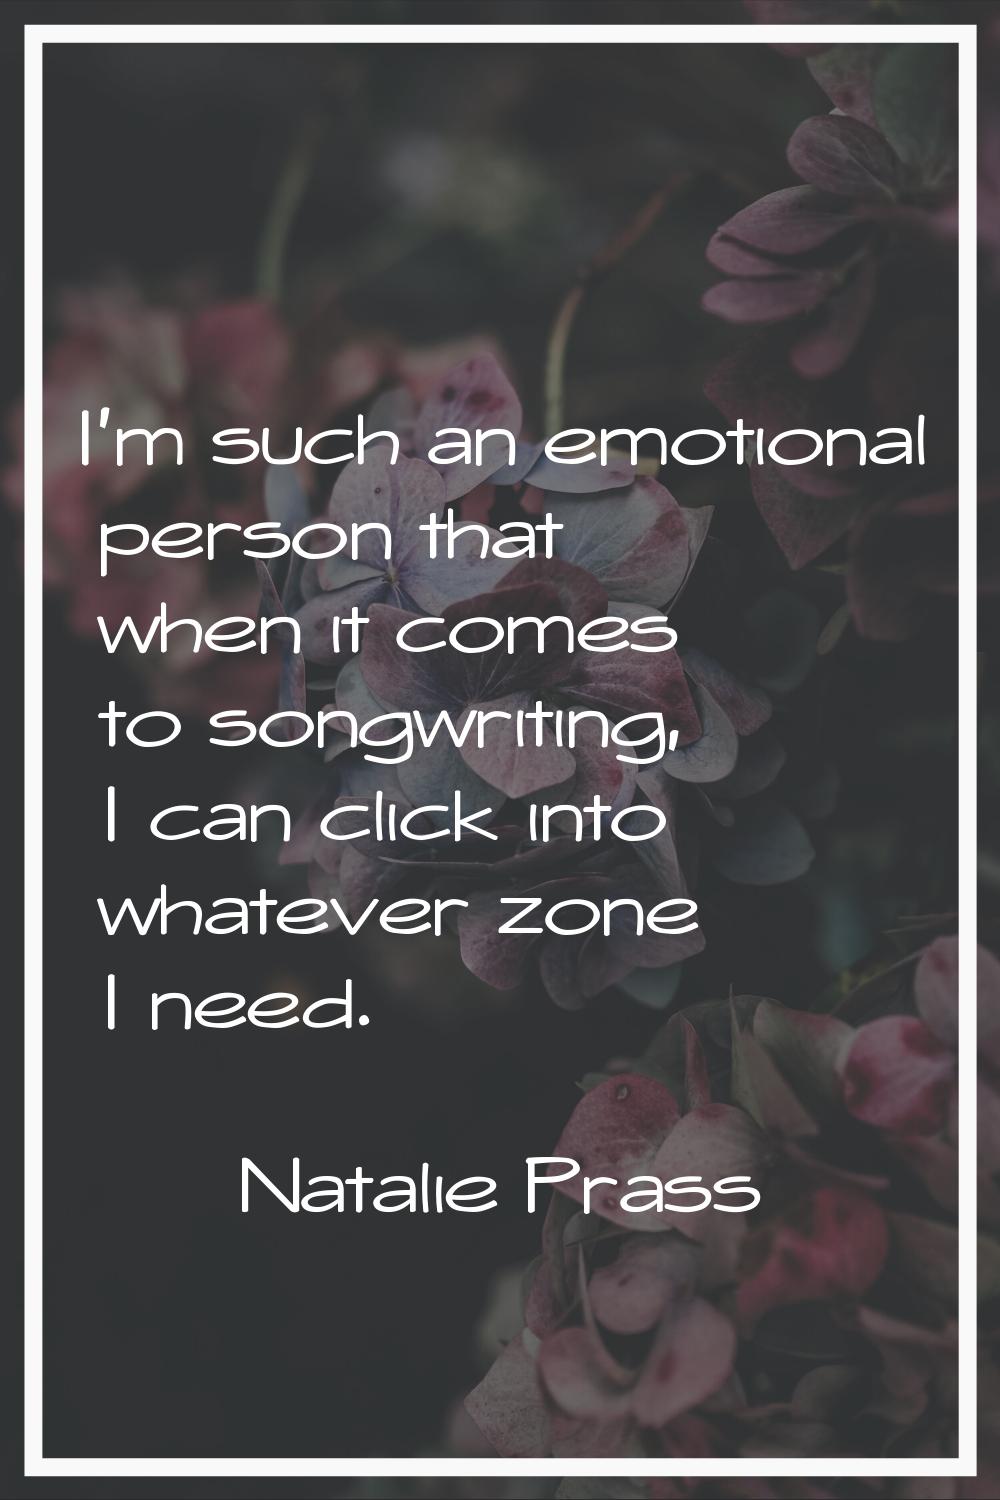 I'm such an emotional person that when it comes to songwriting, I can click into whatever zone I ne